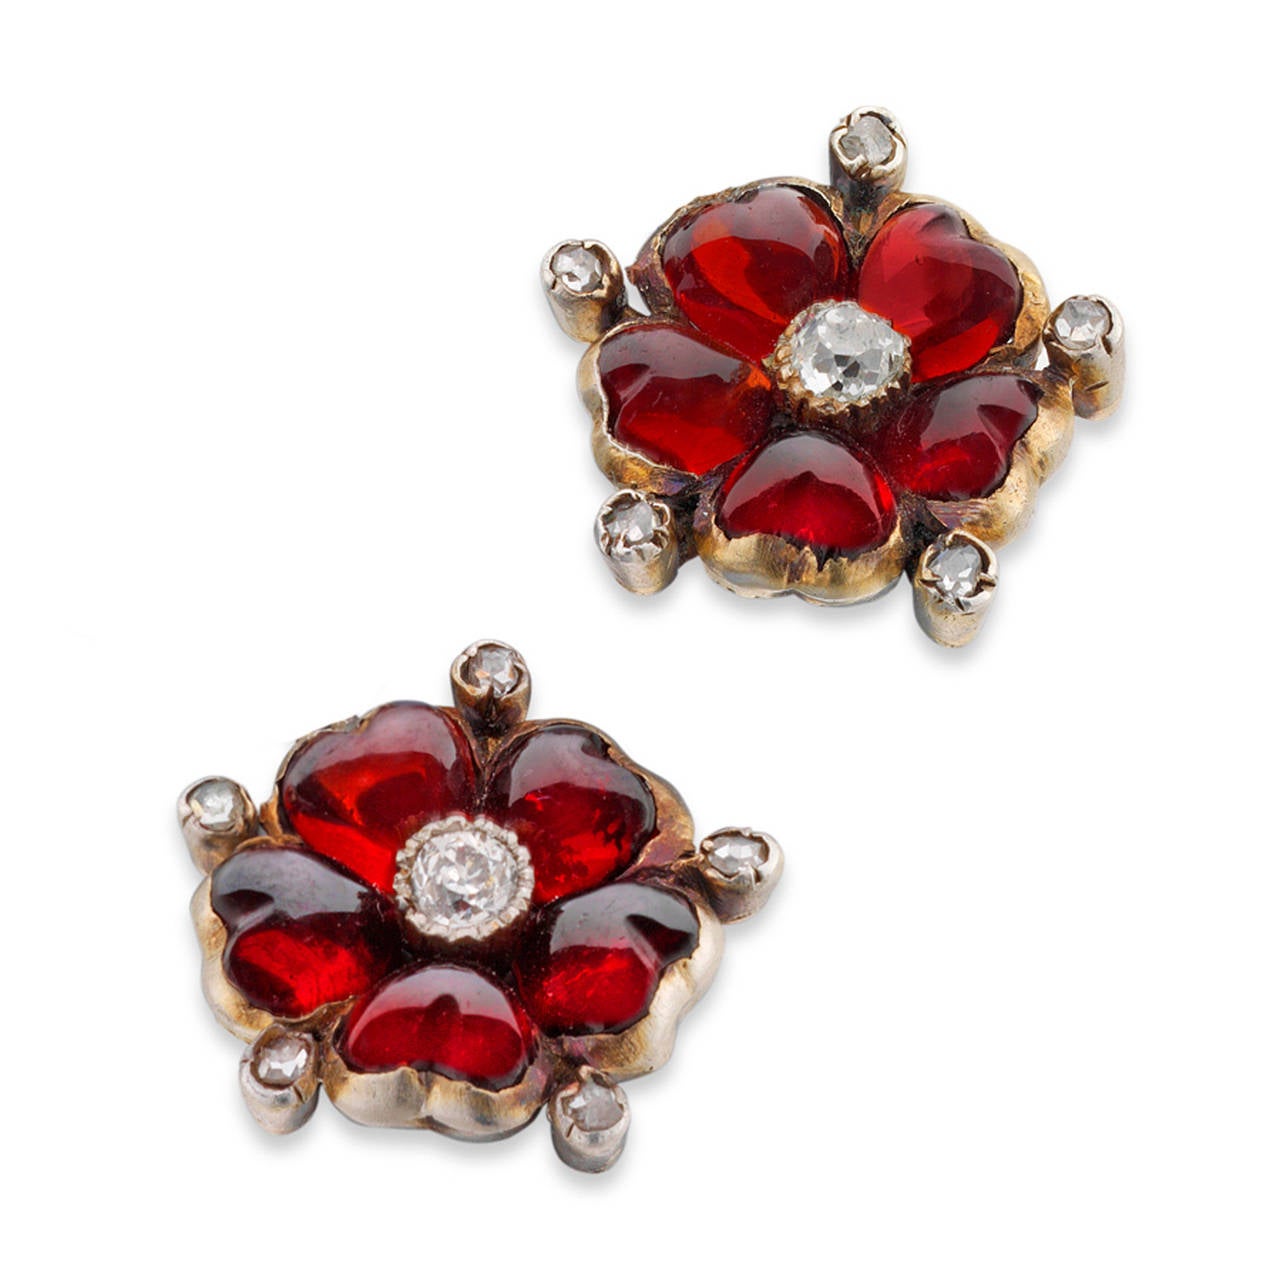 A pair of Victorian garnet and diamond flower earrings, the flower motifs centred with an old-cut diamond surrounded by cabochon garnet petals interspersed with rose-cut diamonds, all set in silver to a yellow gold mount with peg and scroll